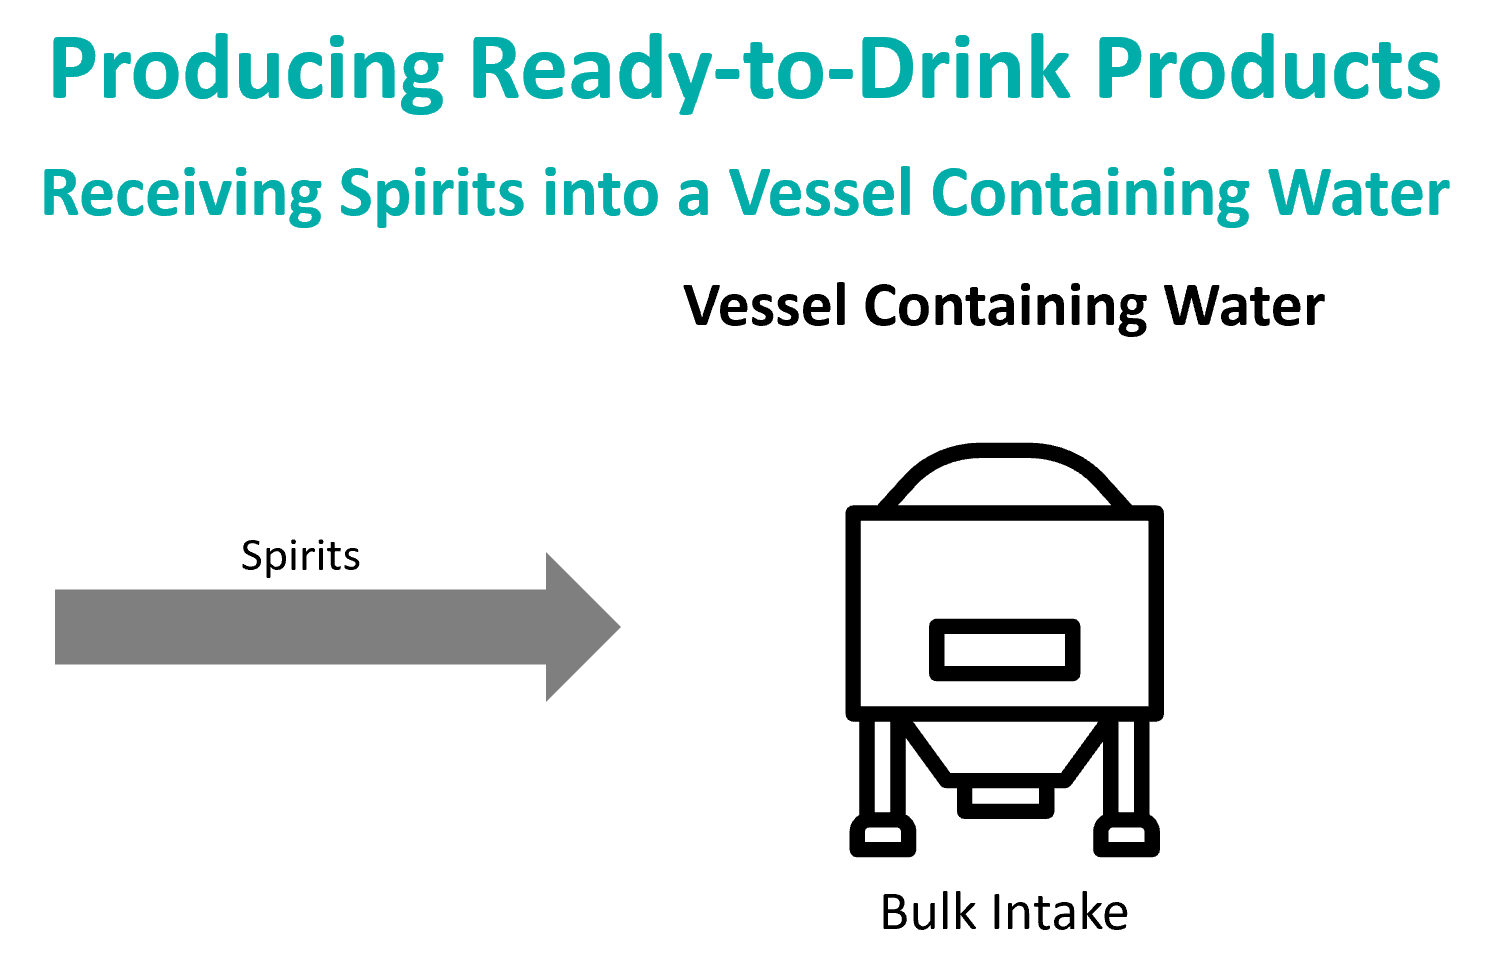 Diagram - Ready to Drink - Receiving Spirits Into Vessel with Water 20230904.png